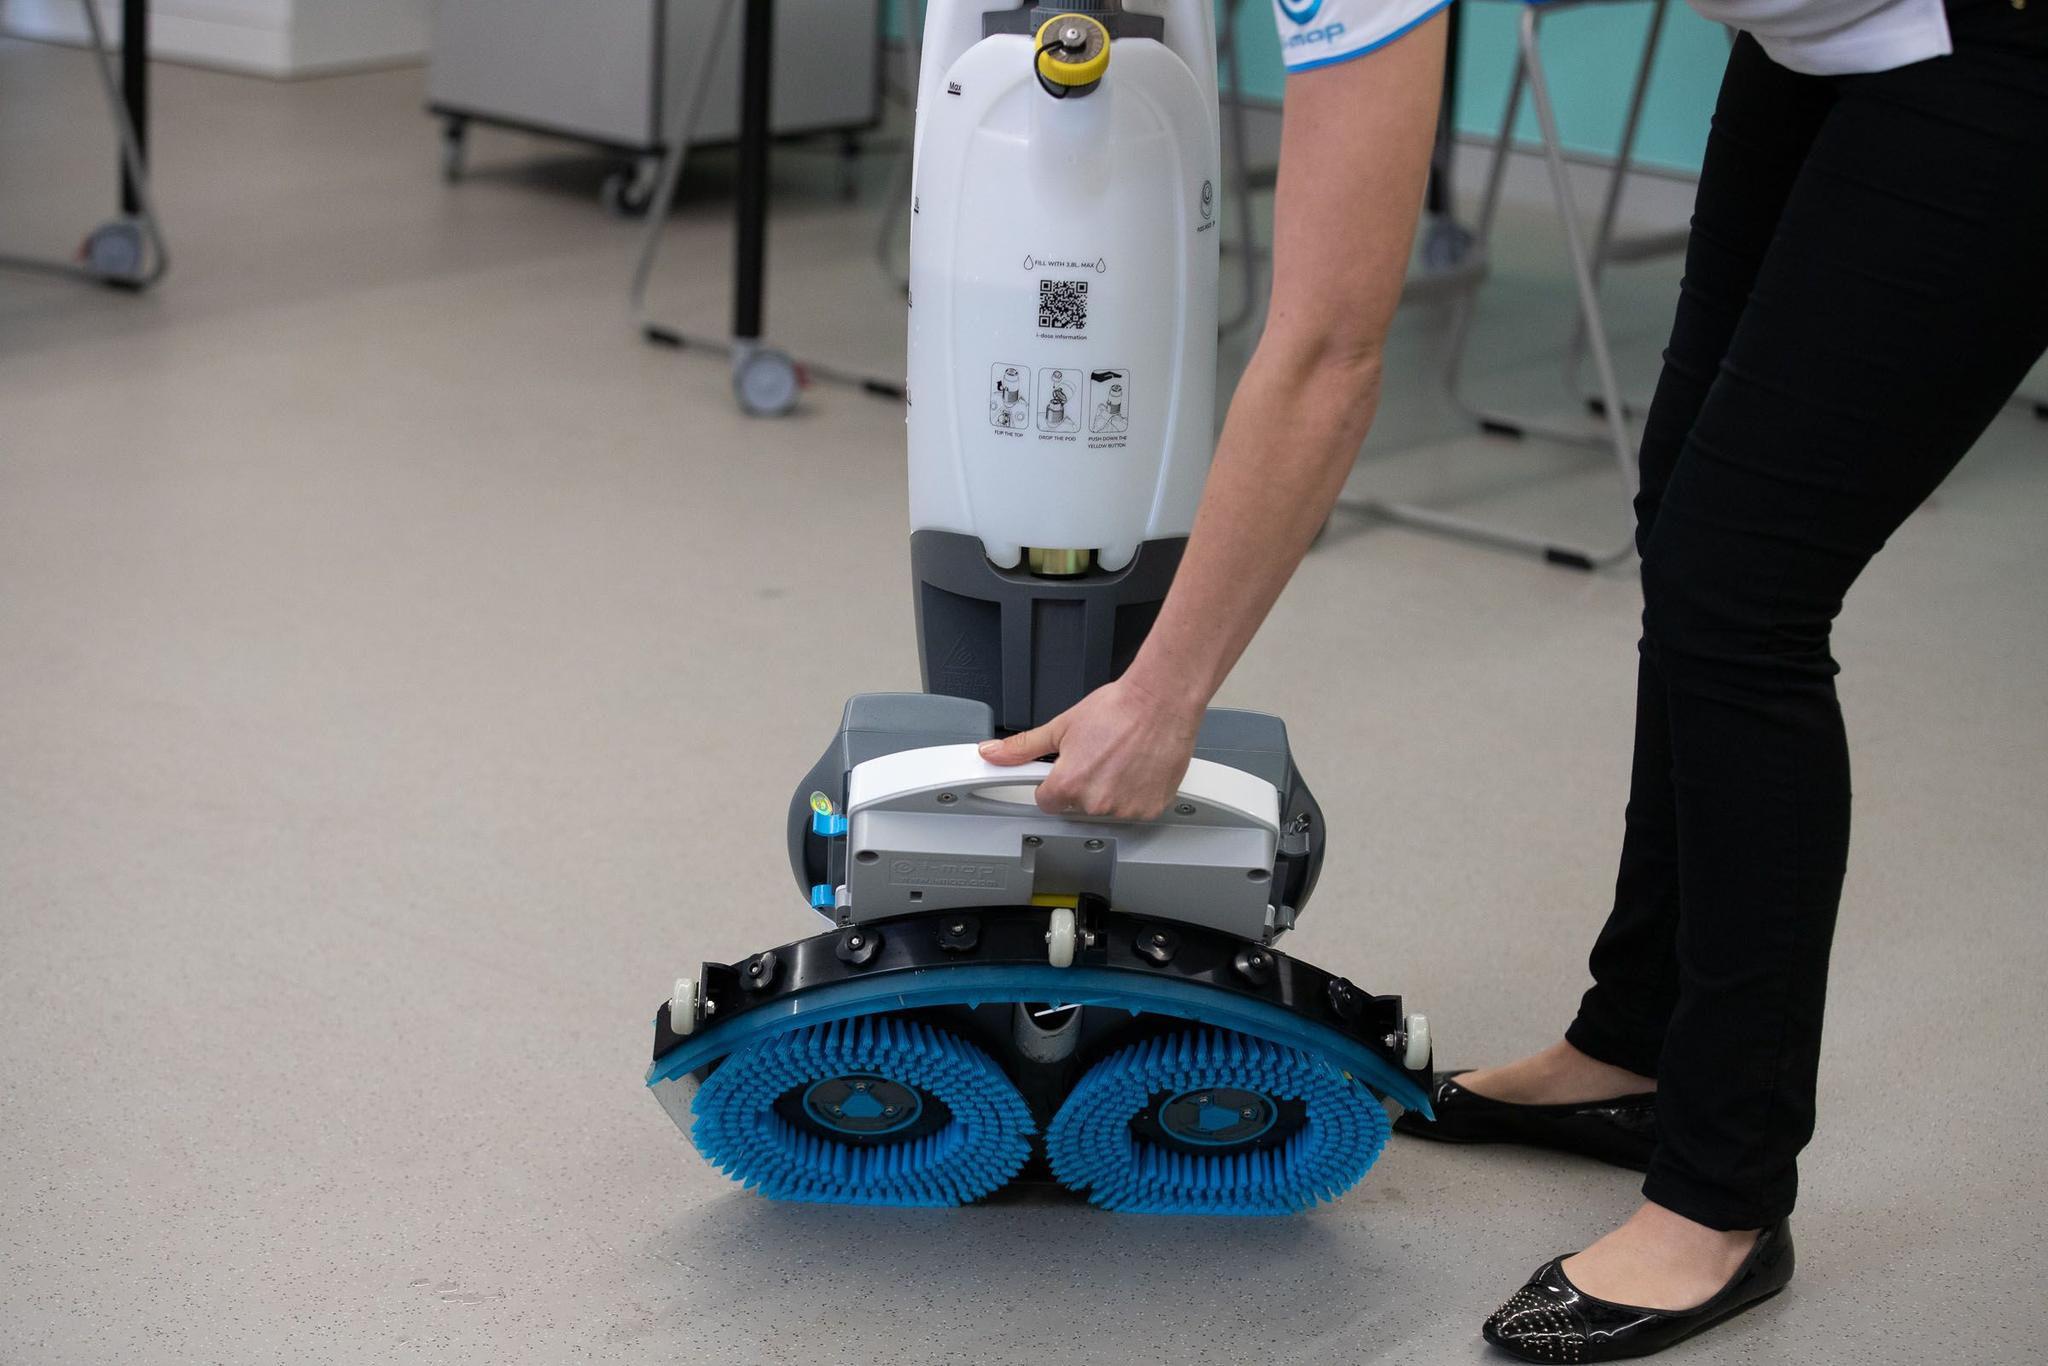 Battery Powered Floor Scrubber, Cordless Cleaner